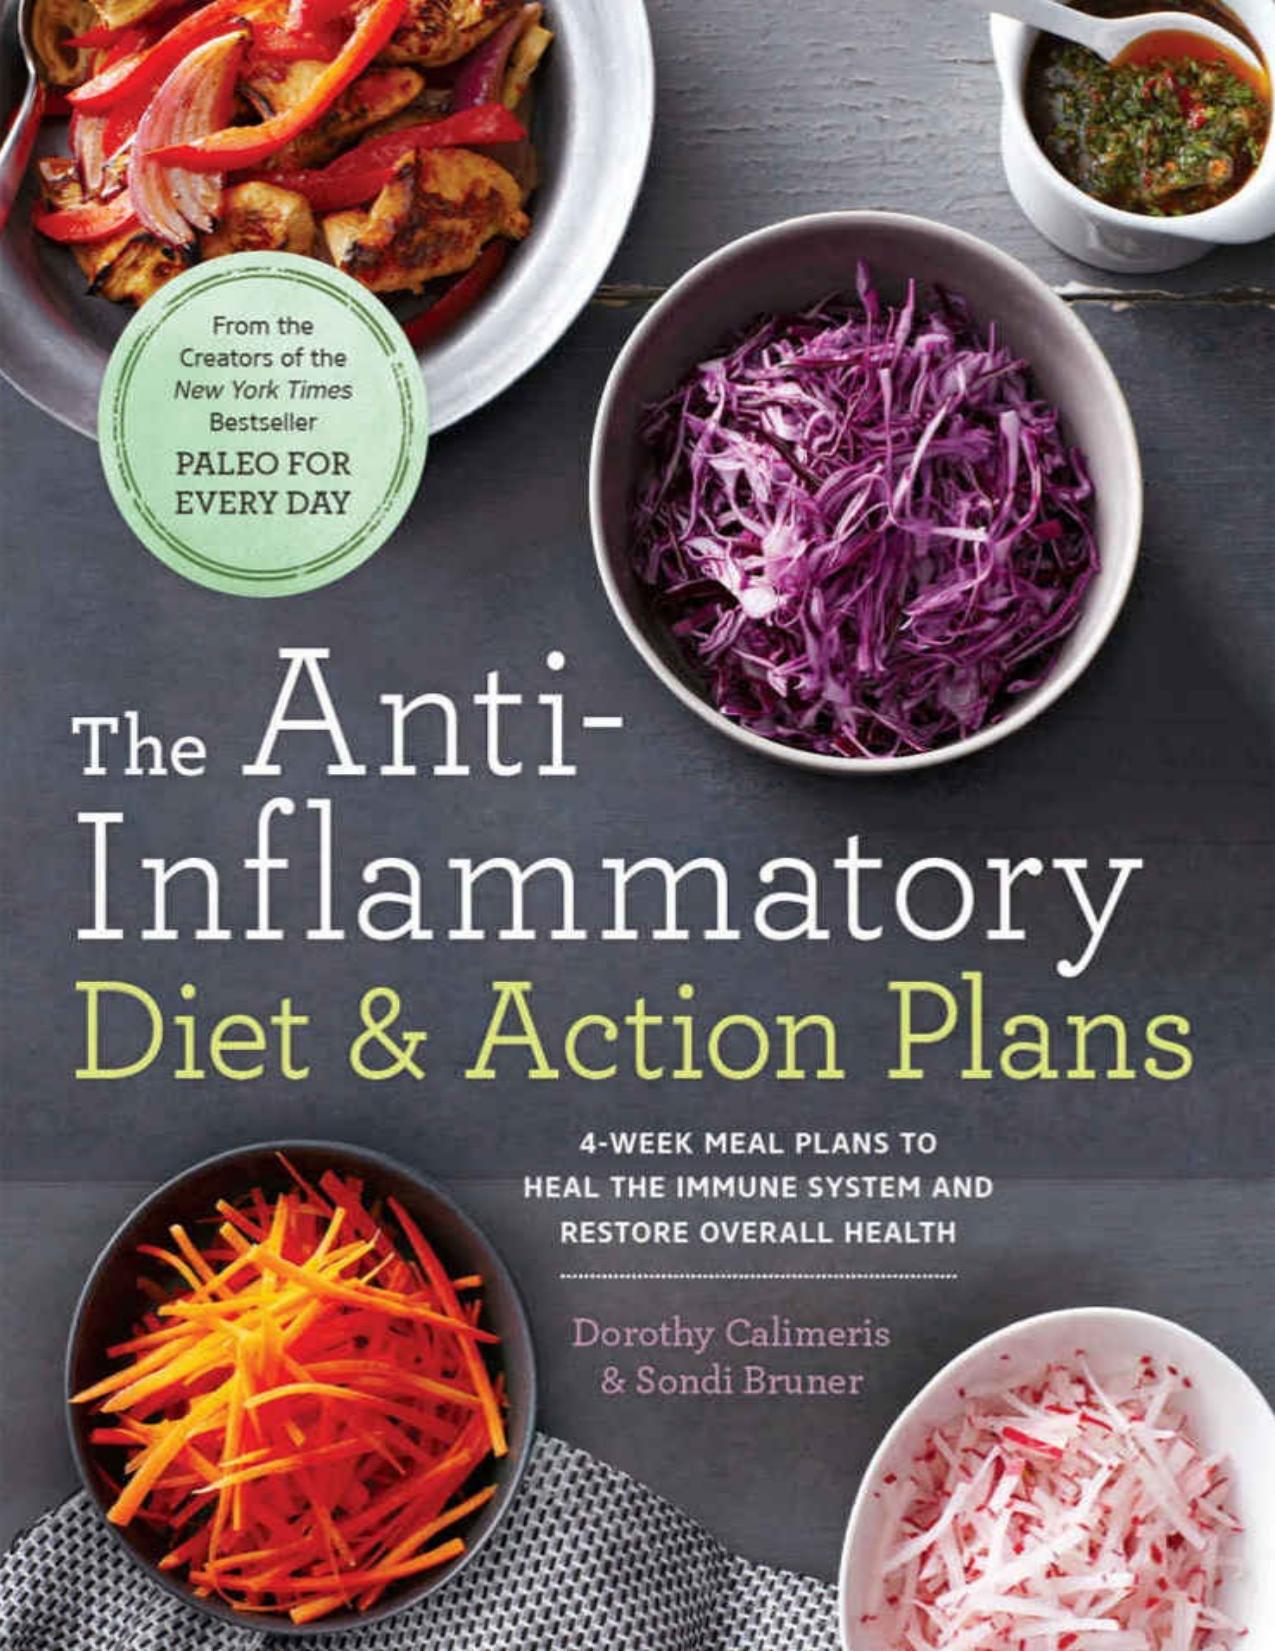 The anti-inflammatory diet \& action plans : 4-week meal plans to heal the immune system and restore overall health - PDFDrive.com